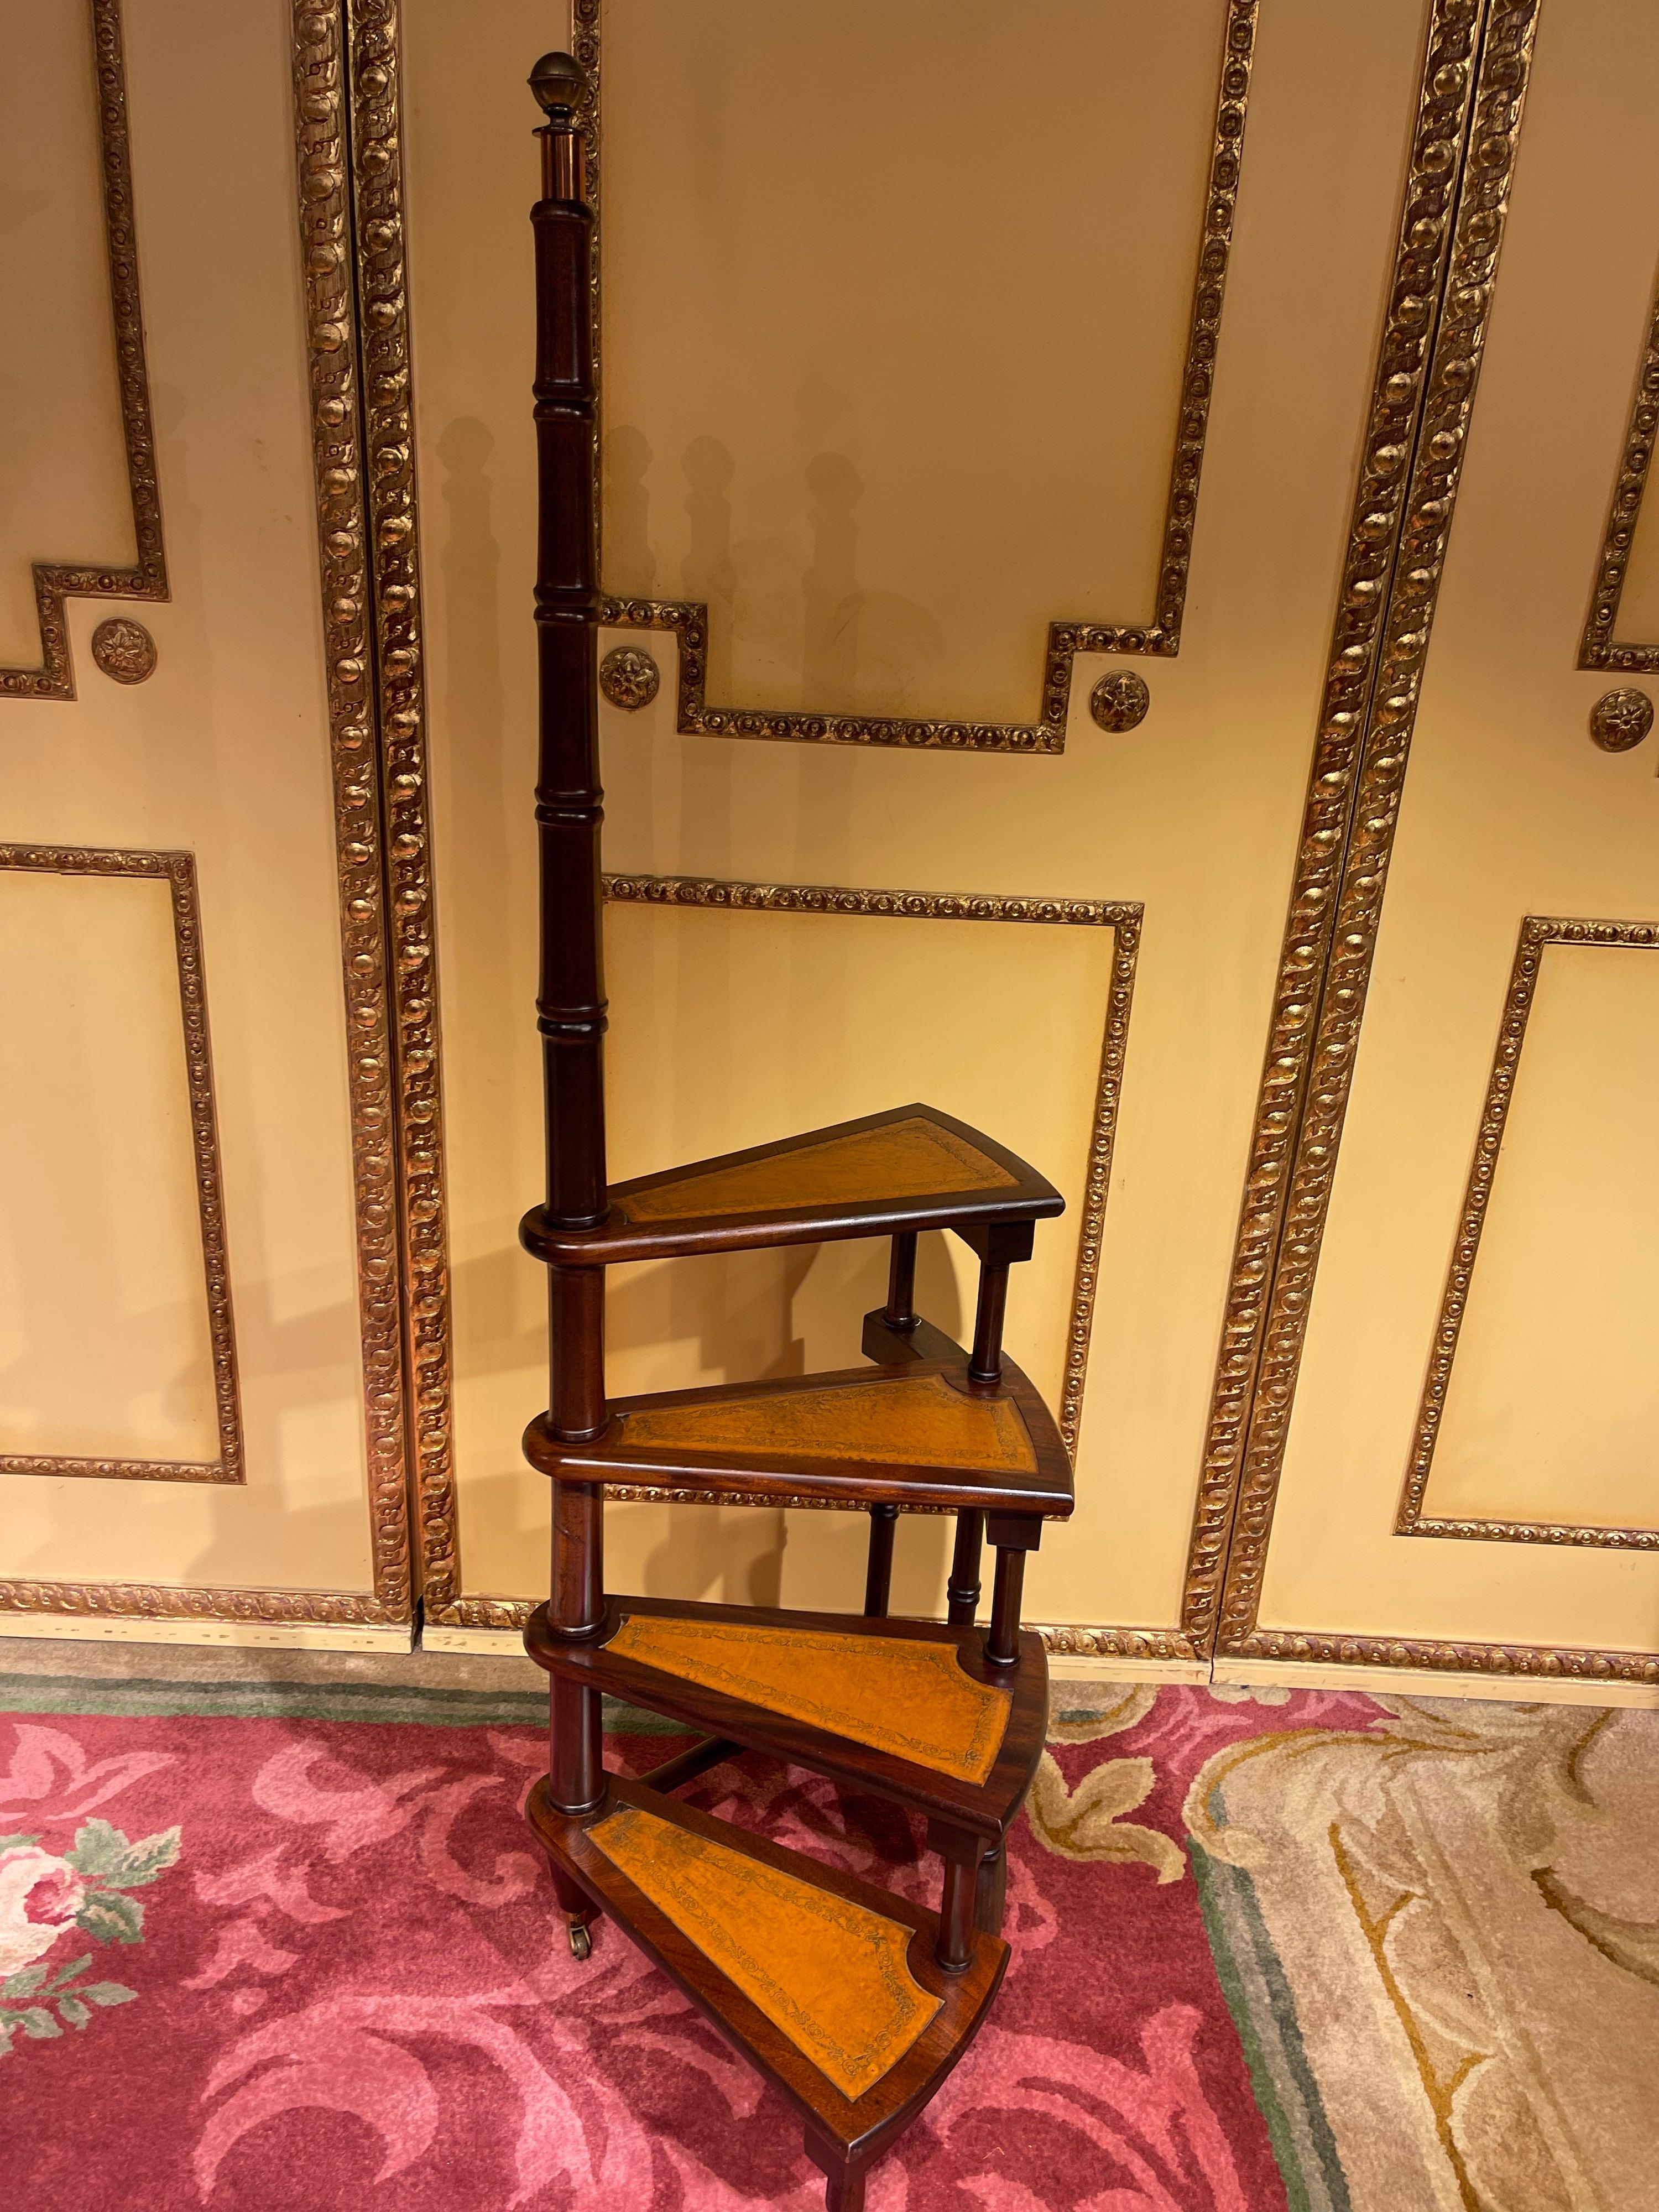 20th century English leather library step or stairs / stepladder, Victorian with casters

Solid wood mahogany stained. English library manager / stepladder 20th century, Victorian. Four step with classic leather plate and gold embossing. Library